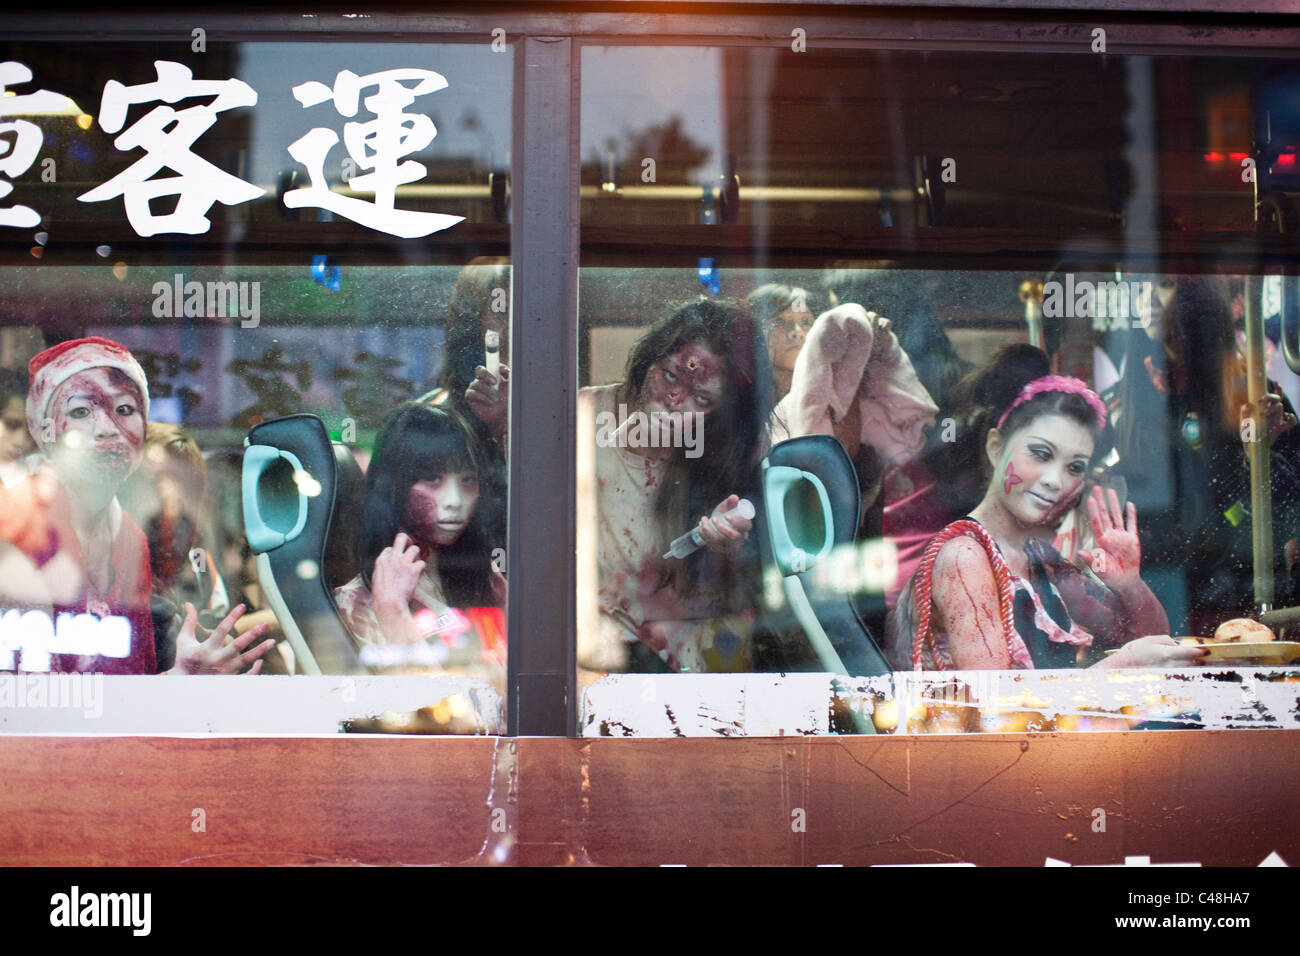 Zombies on the bus in Ximending, Taipei, Taiwan, October 30, 2010. Stock Photo